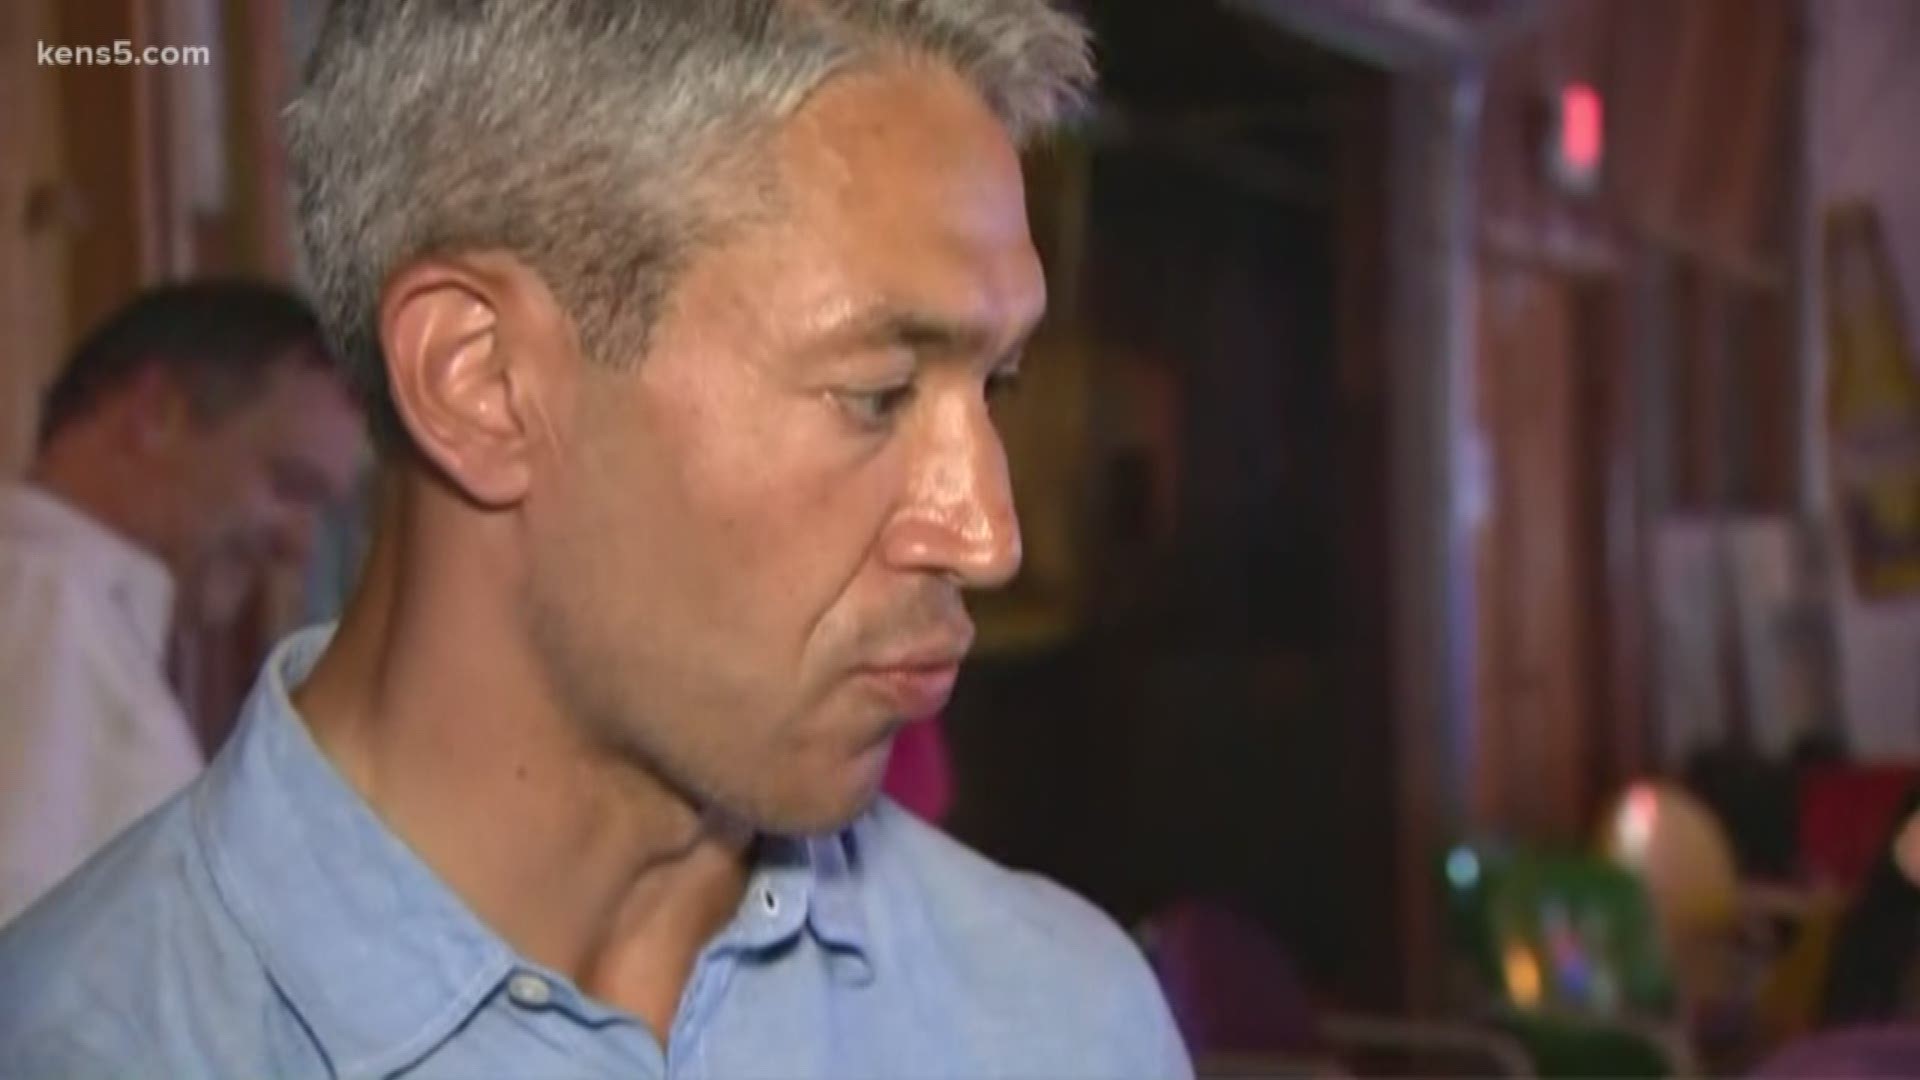 Incumbent San Antonio Mayor Ron Nirenberg is the winner in Saturday's mayoral race runoff and has been re-elected to serve a second term.

Nirenberg had 51.56 percent of the votes and District 6 Councilman Greg Brockhouse had 48.44 percent following the count of early votes, a 2,775 vote advantage for the incumbent mayor.